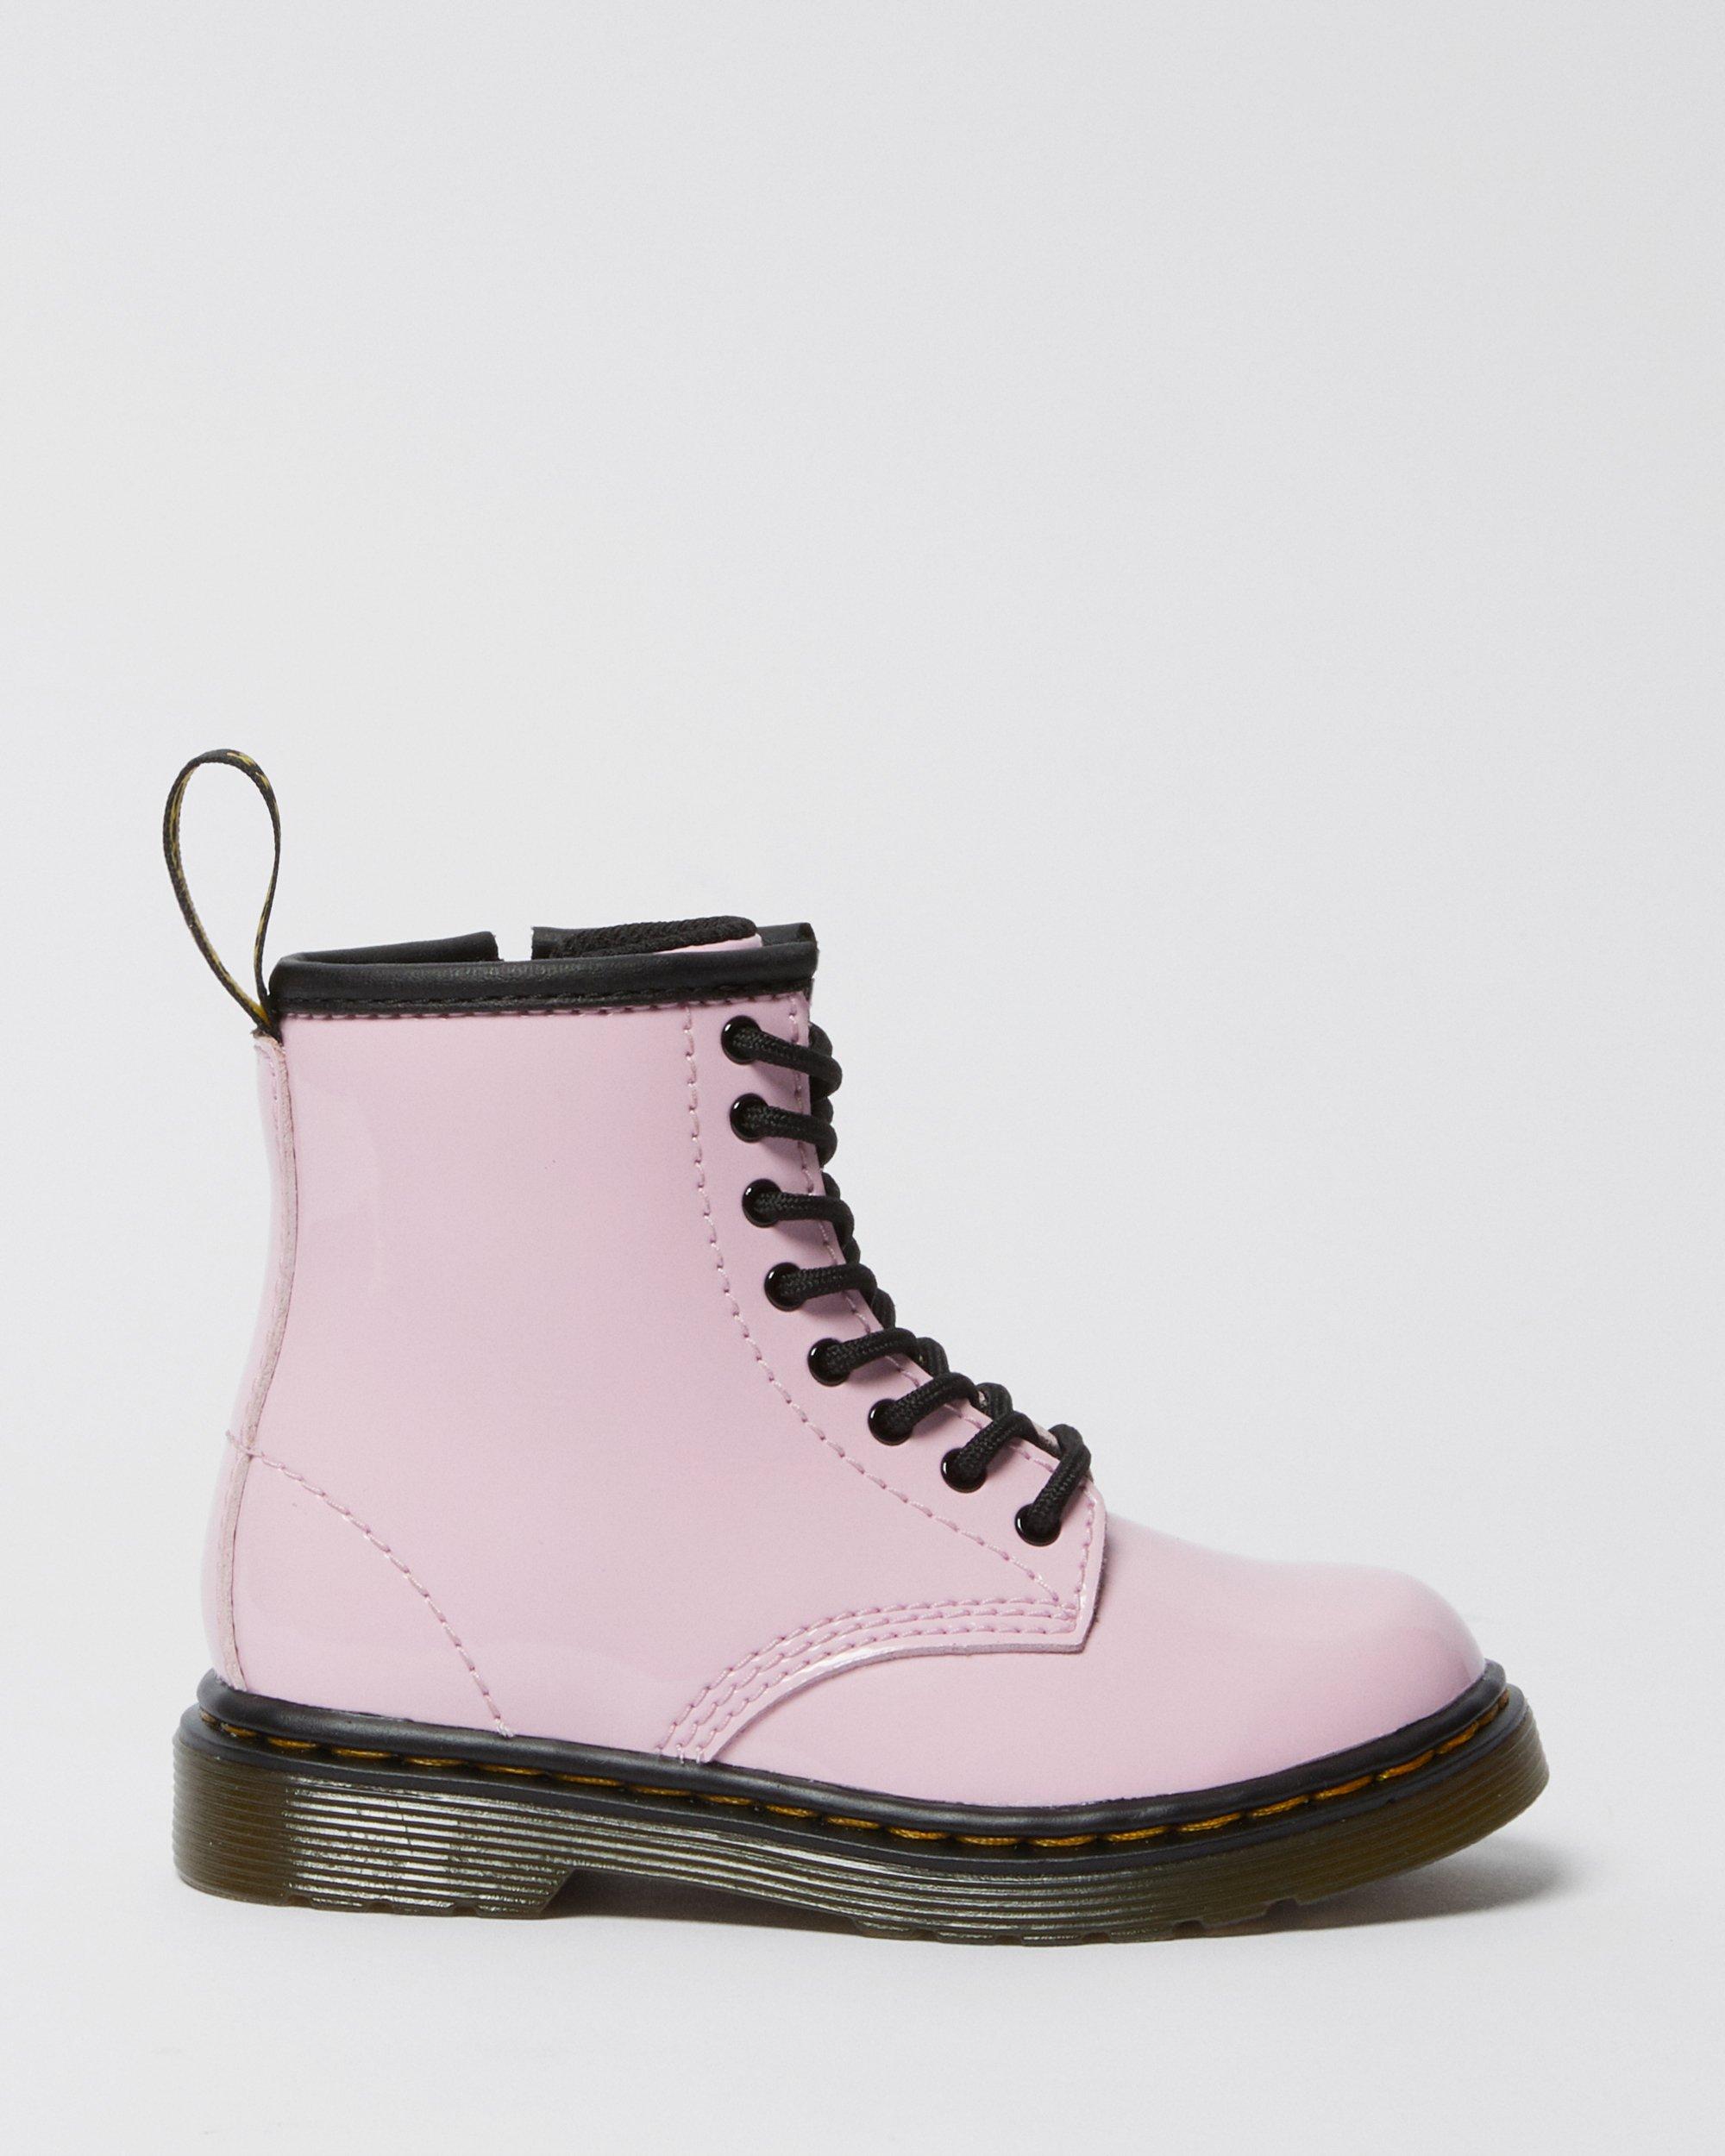 Toddler 1460 Patent Leather Lace Up Boots in Pale Pink | Dr. Martens